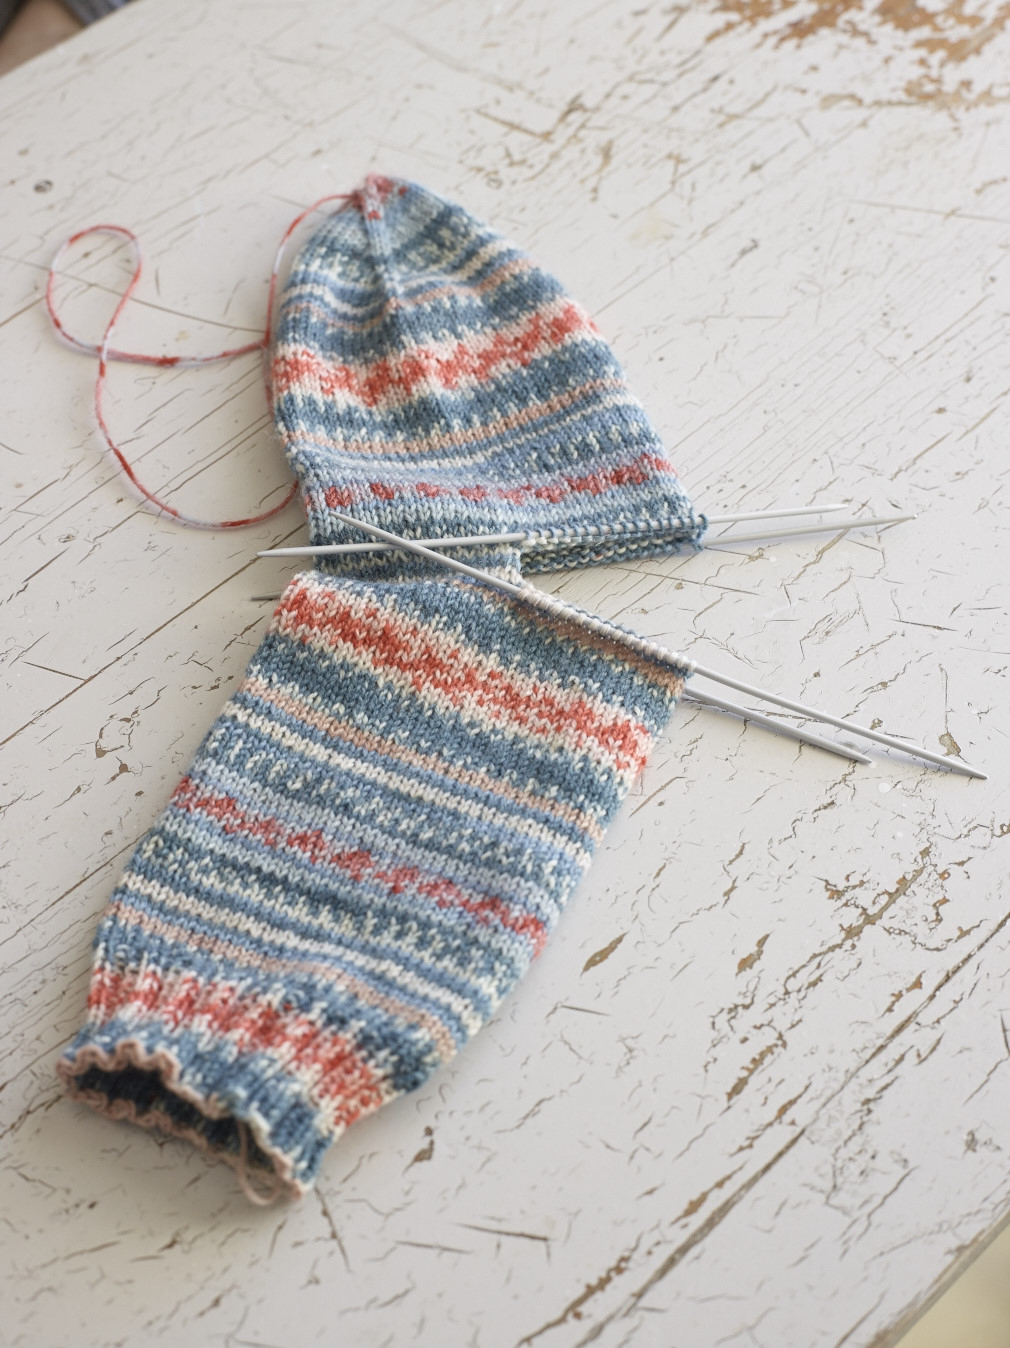 Knitting Sock Patterns The Easiest Sock In The World